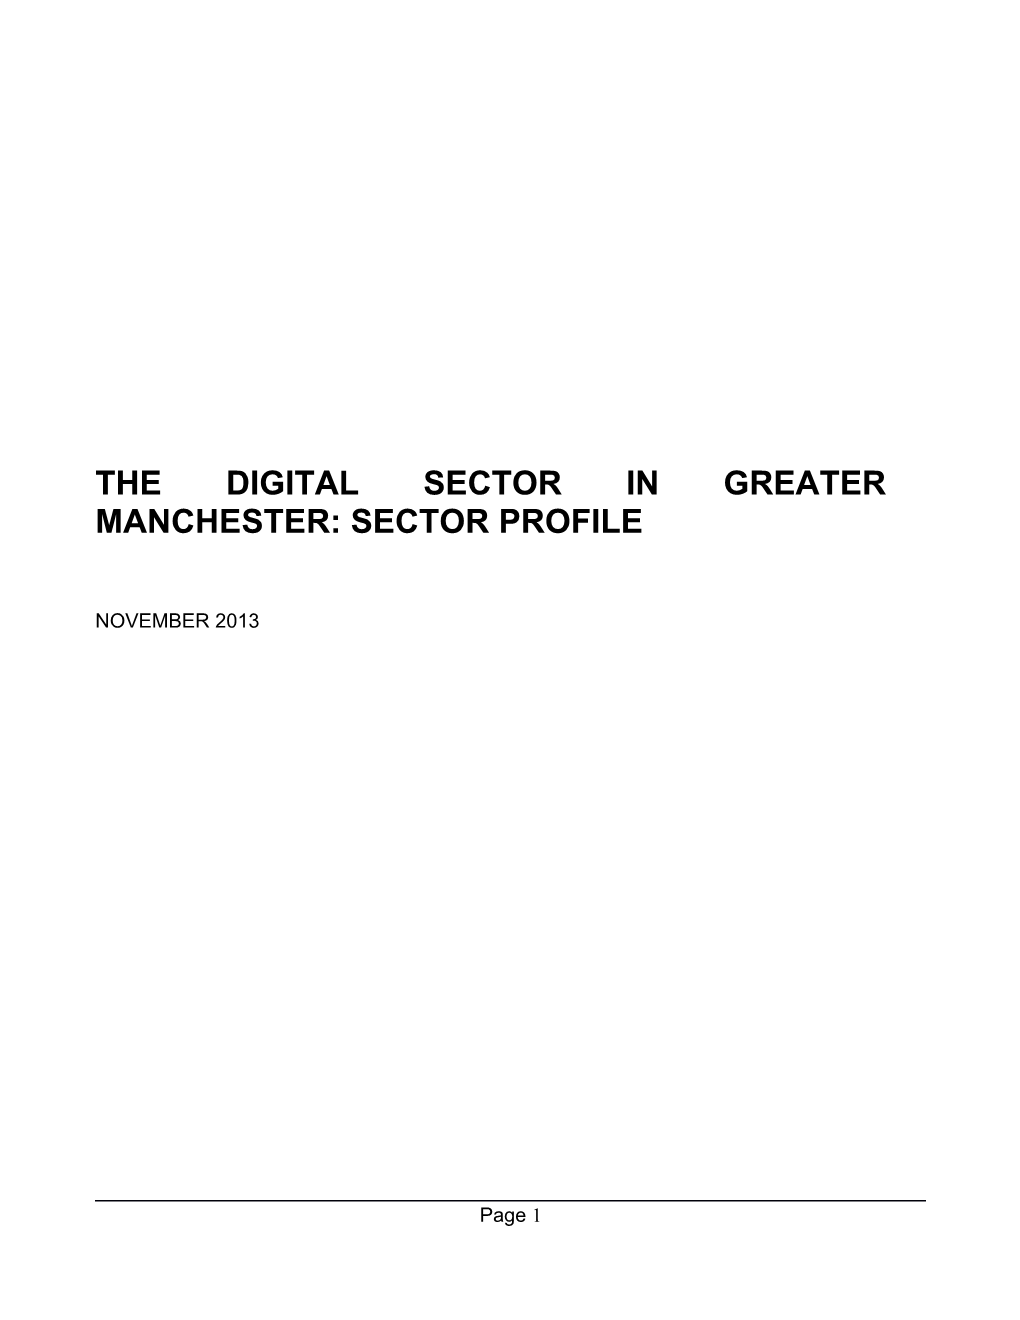 The Digital Sector in Greater Manchester: Sector Profile